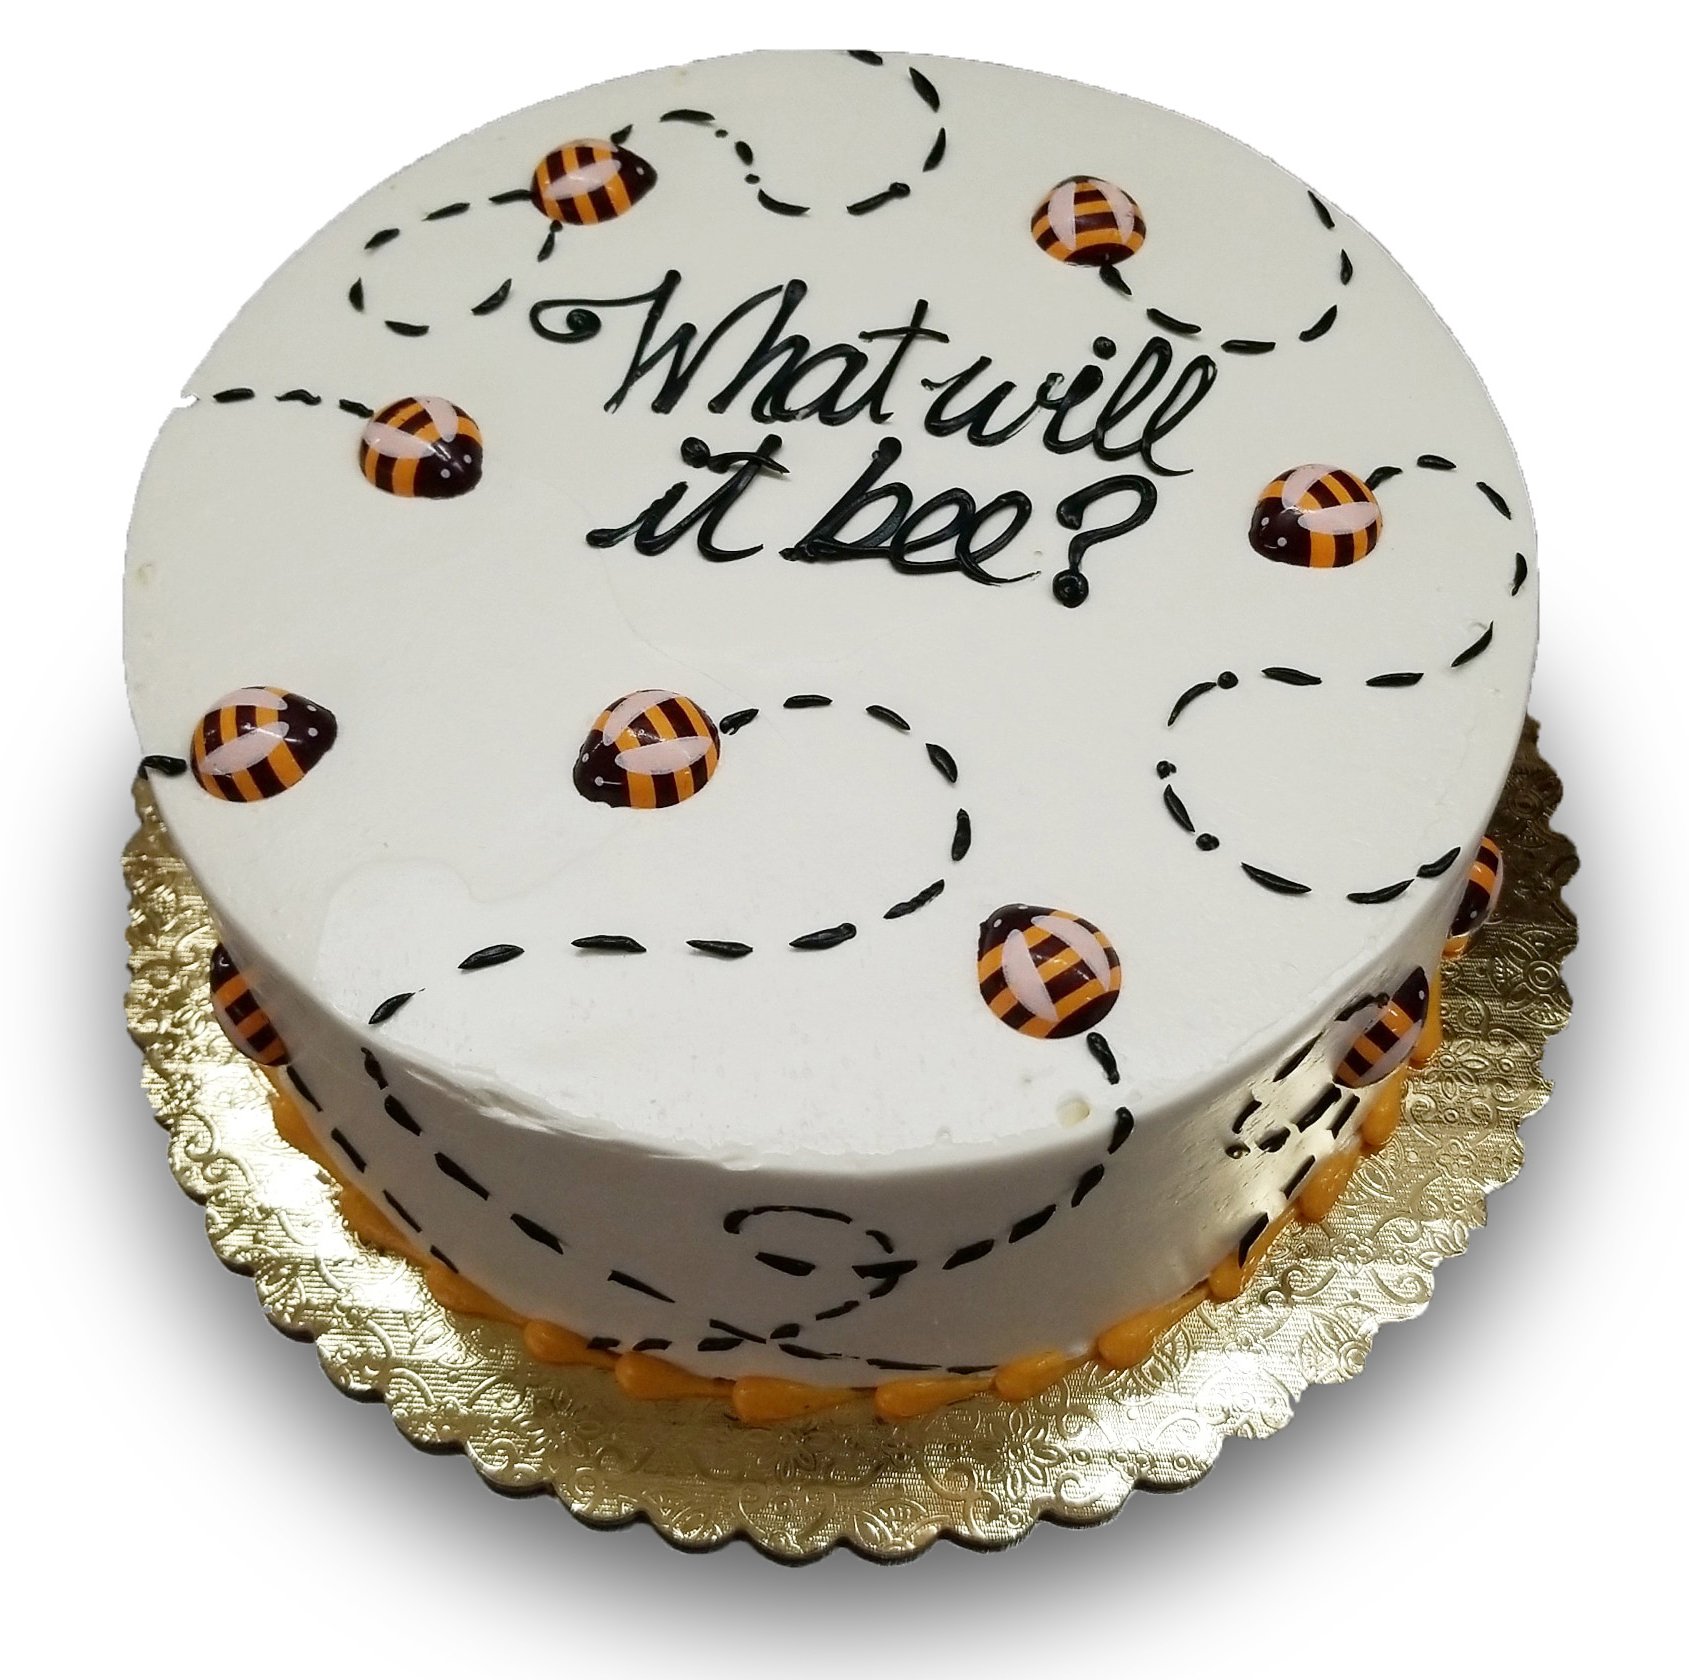 BS08. Bumble bee gender reveal cake